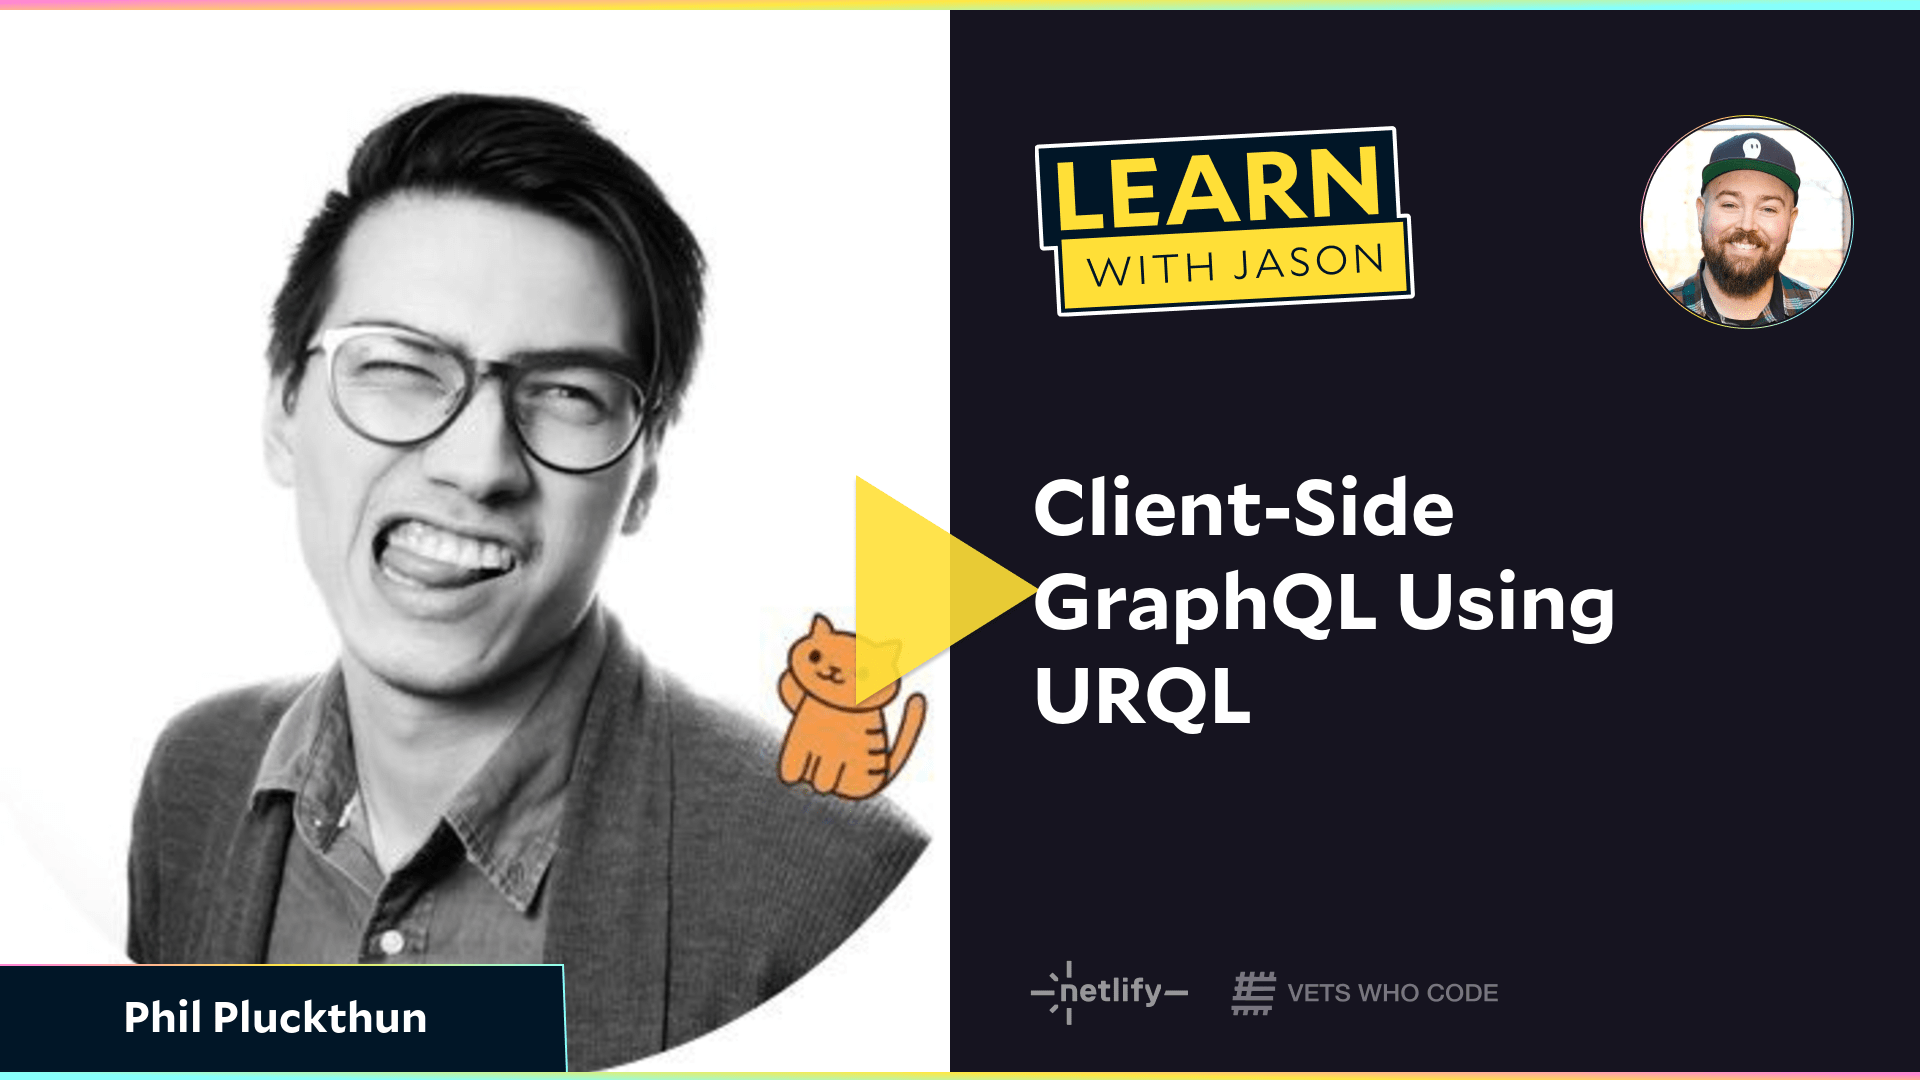 Client-Side GraphQL Using URQL (with Phil Pluckthun)